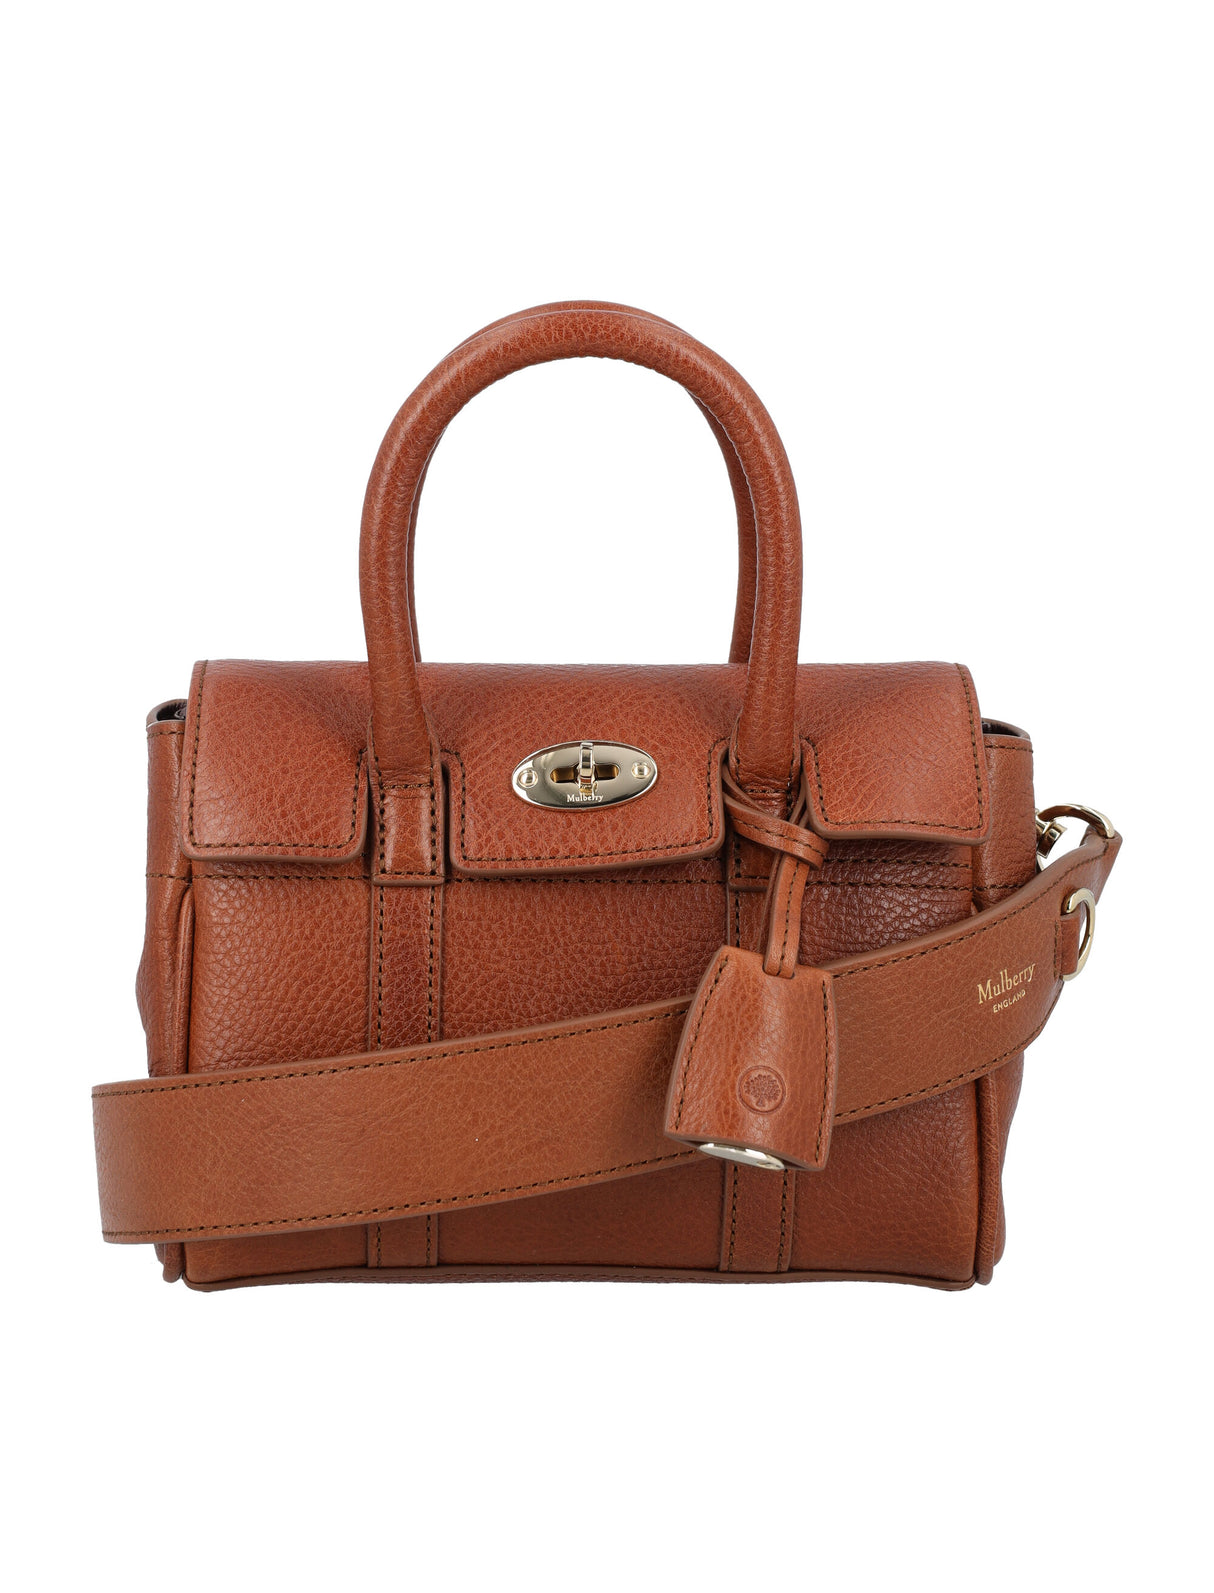 MULBERRY Mini Bayswater Leather Handbag with Shoulder Strap and Gold Accents, Brown - 18.5cm W x 12.5cm H x 8cm D